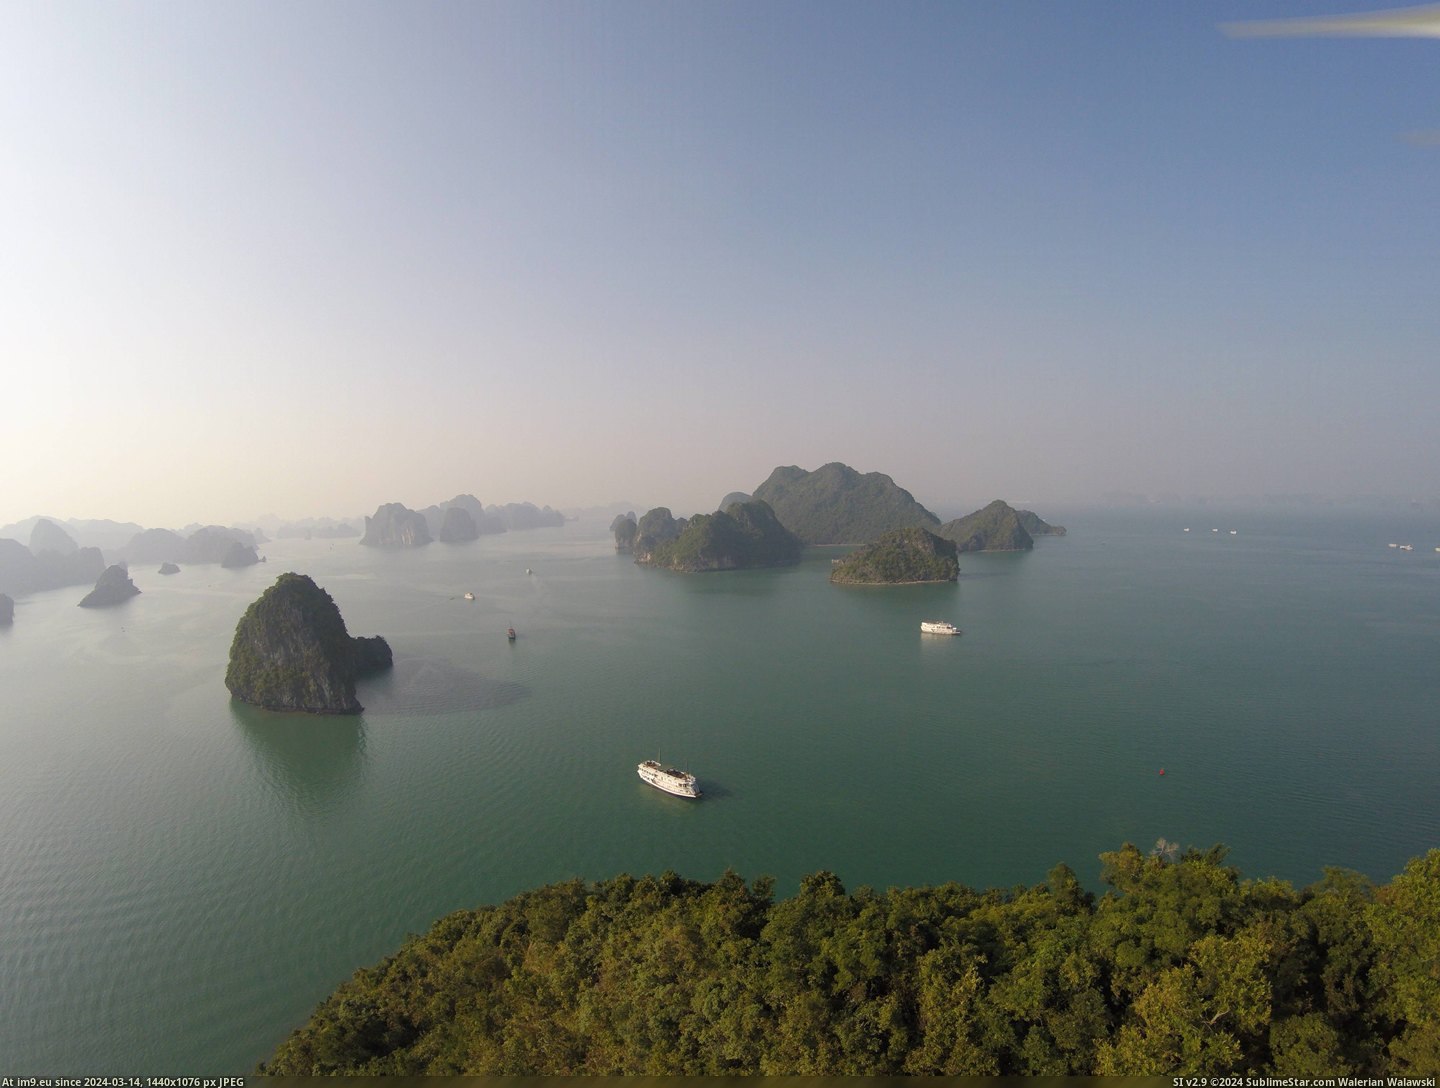 #Lost #Gorgeous #Result #Vietnam #Drone #Bay #4000x3000 #Control [Earthporn] Lost control of my drone in Halong Bay in Vietnam, the result was gorgeous [4000x3000] Pic. (Bild von album My r/EARTHPORN favs))